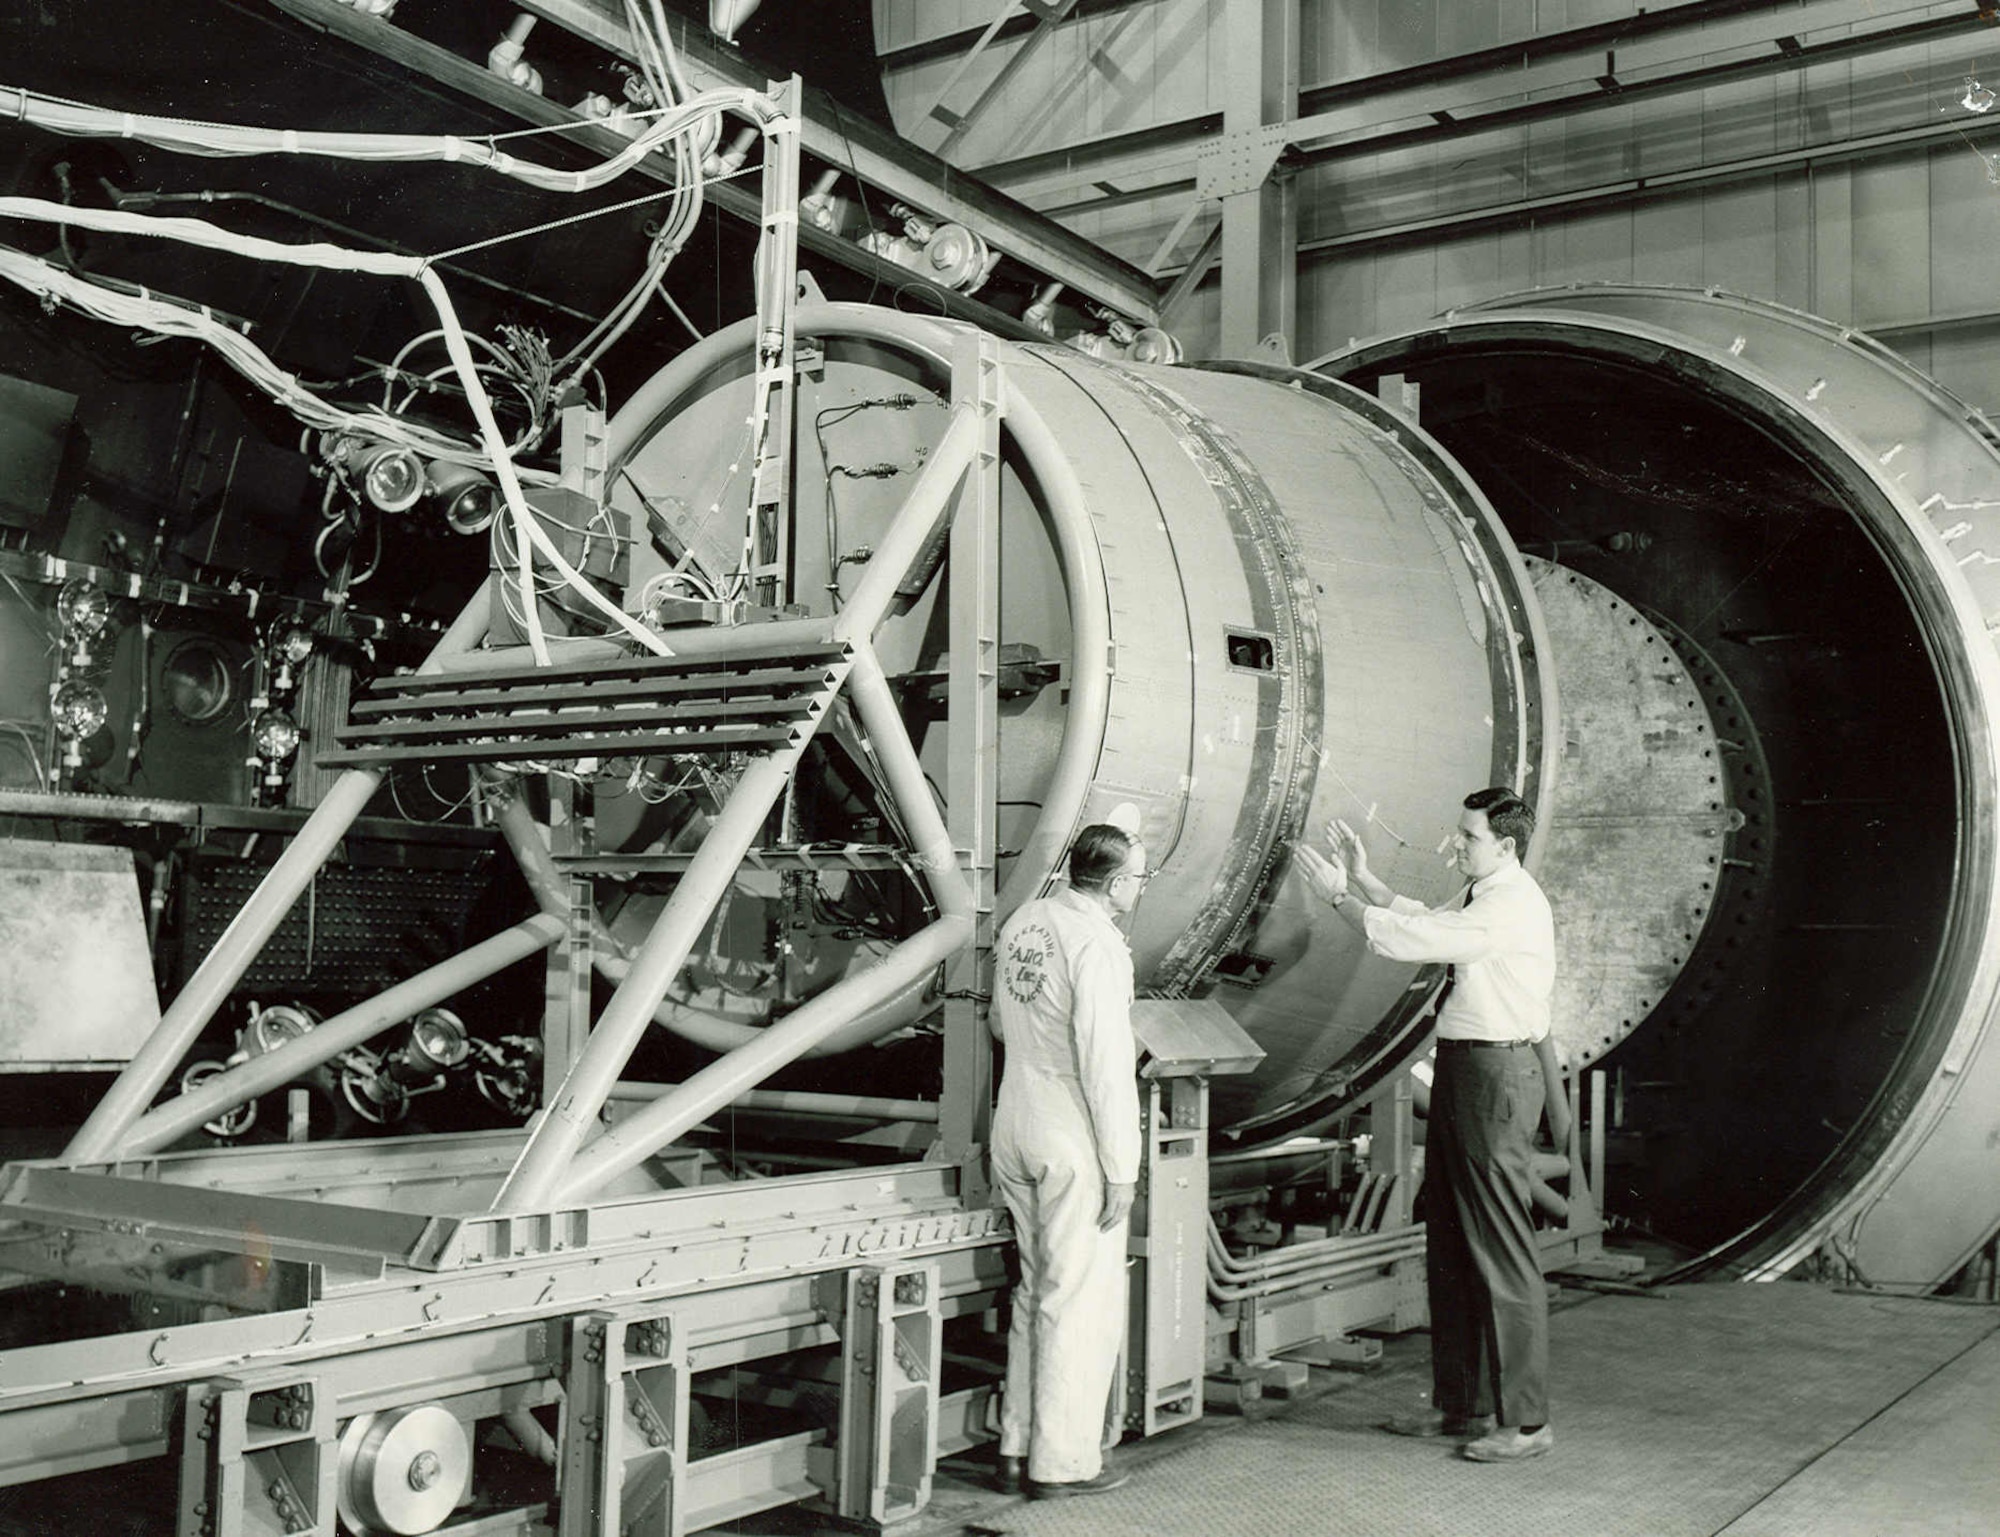 A full-scale replica of the Gemini adapter section and base of capsule is being prepared for simulated high altitude test of emergency abort system occurring in 1963 in the AEDC J-1 test cell at Arnold Air Force Base. The linear shaped explosive charge, which encircles the adapter section (the larger right-hand portion of this test installation), is set off to free the capsule from the booster, then the capsule retrorockets are fired to push the capsule away from the booster. The test showed modifications are needed to provide for successful emergency aborts. (U.S. Air Force photo)